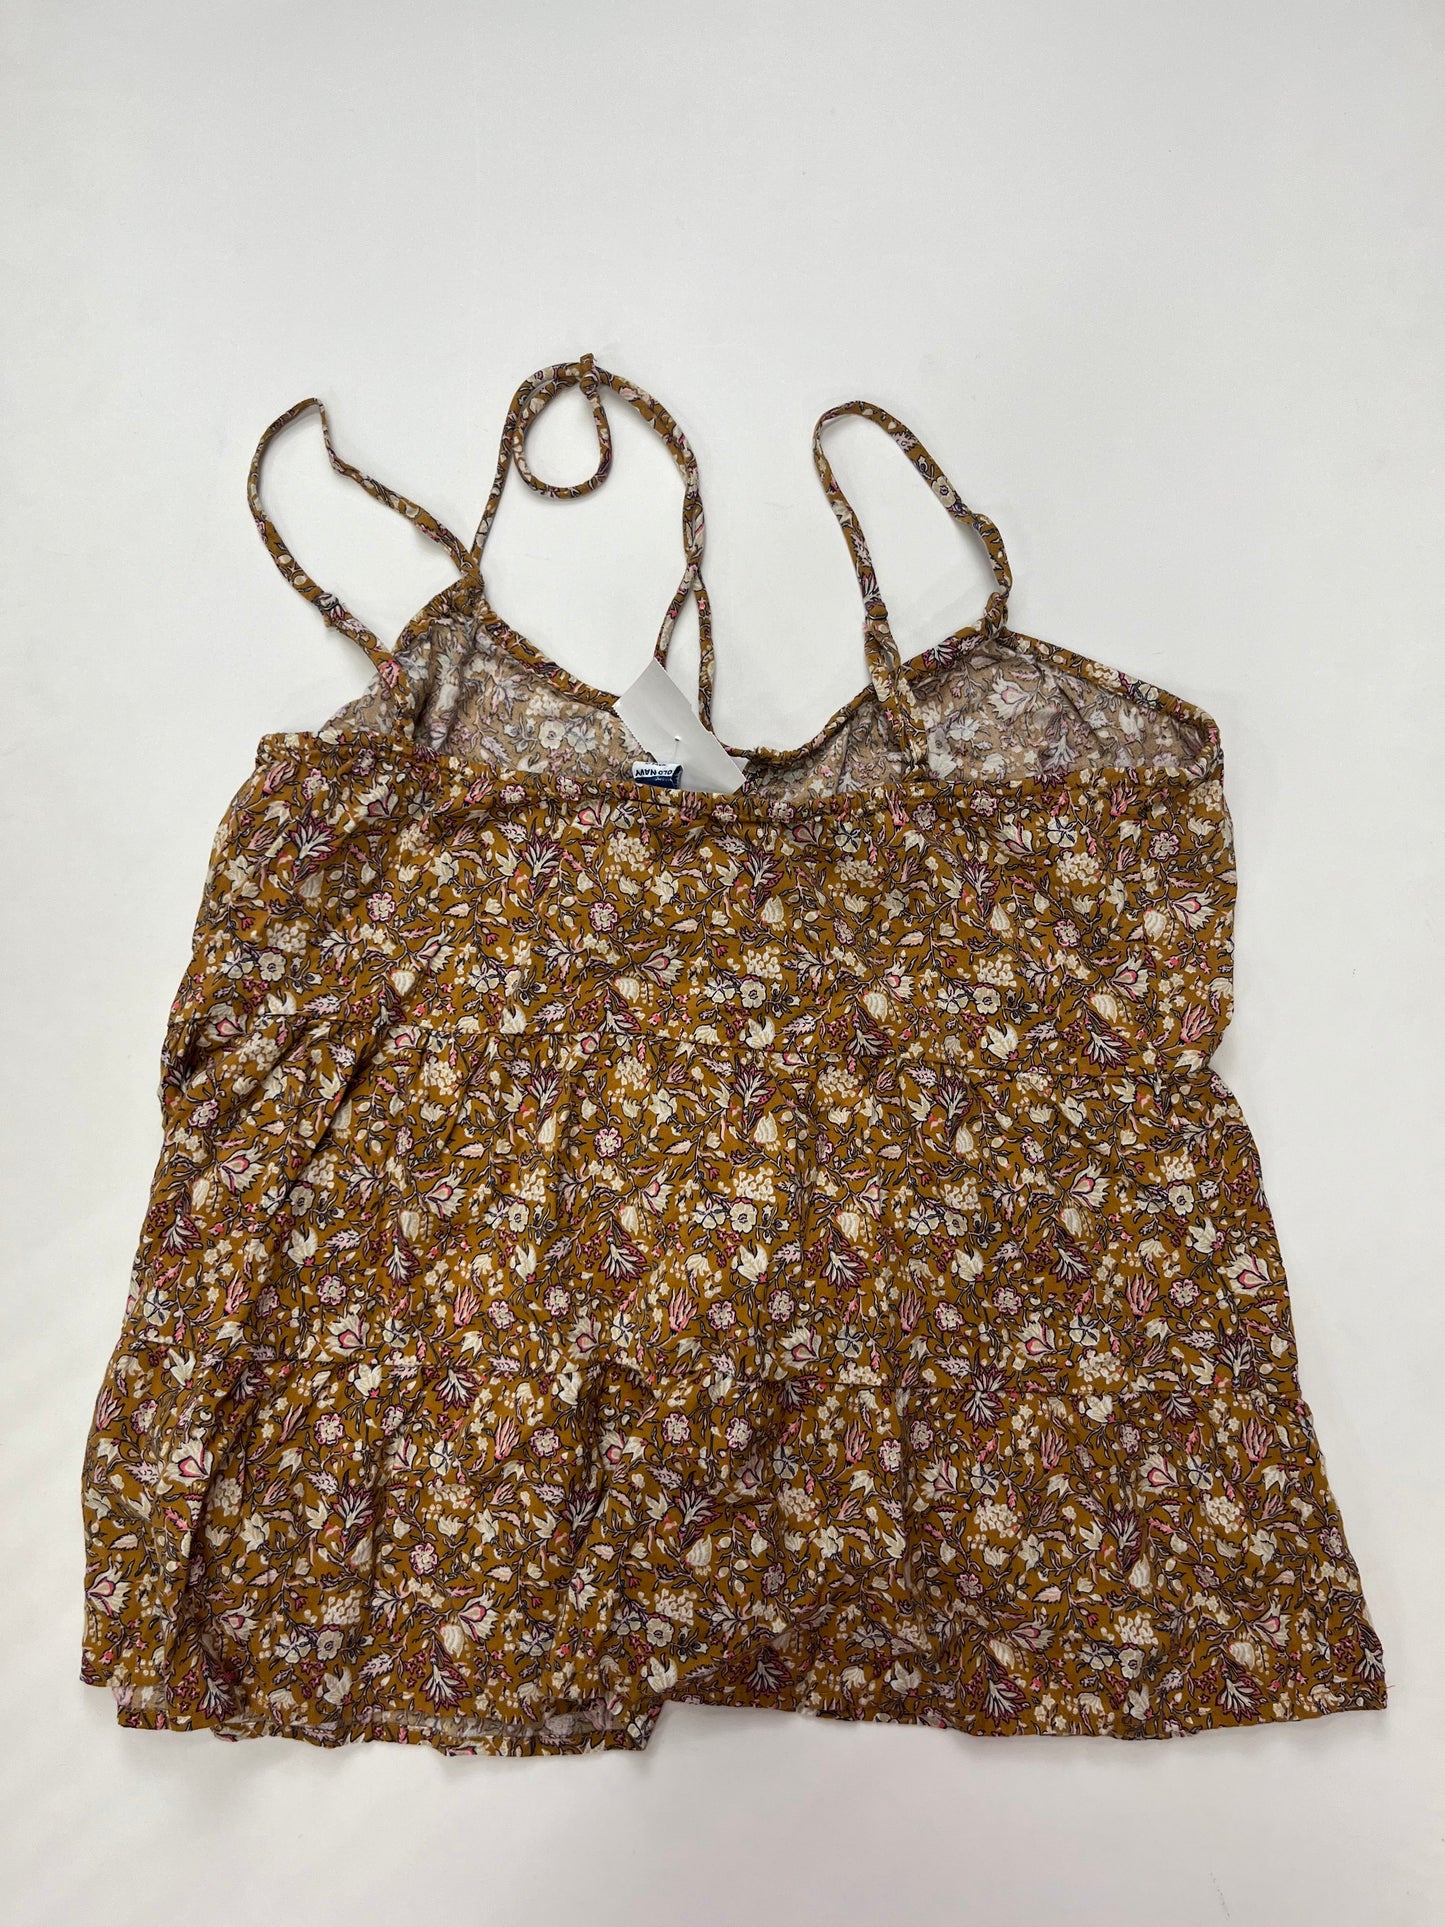 Floral Tank Top Old Navy O, Size M